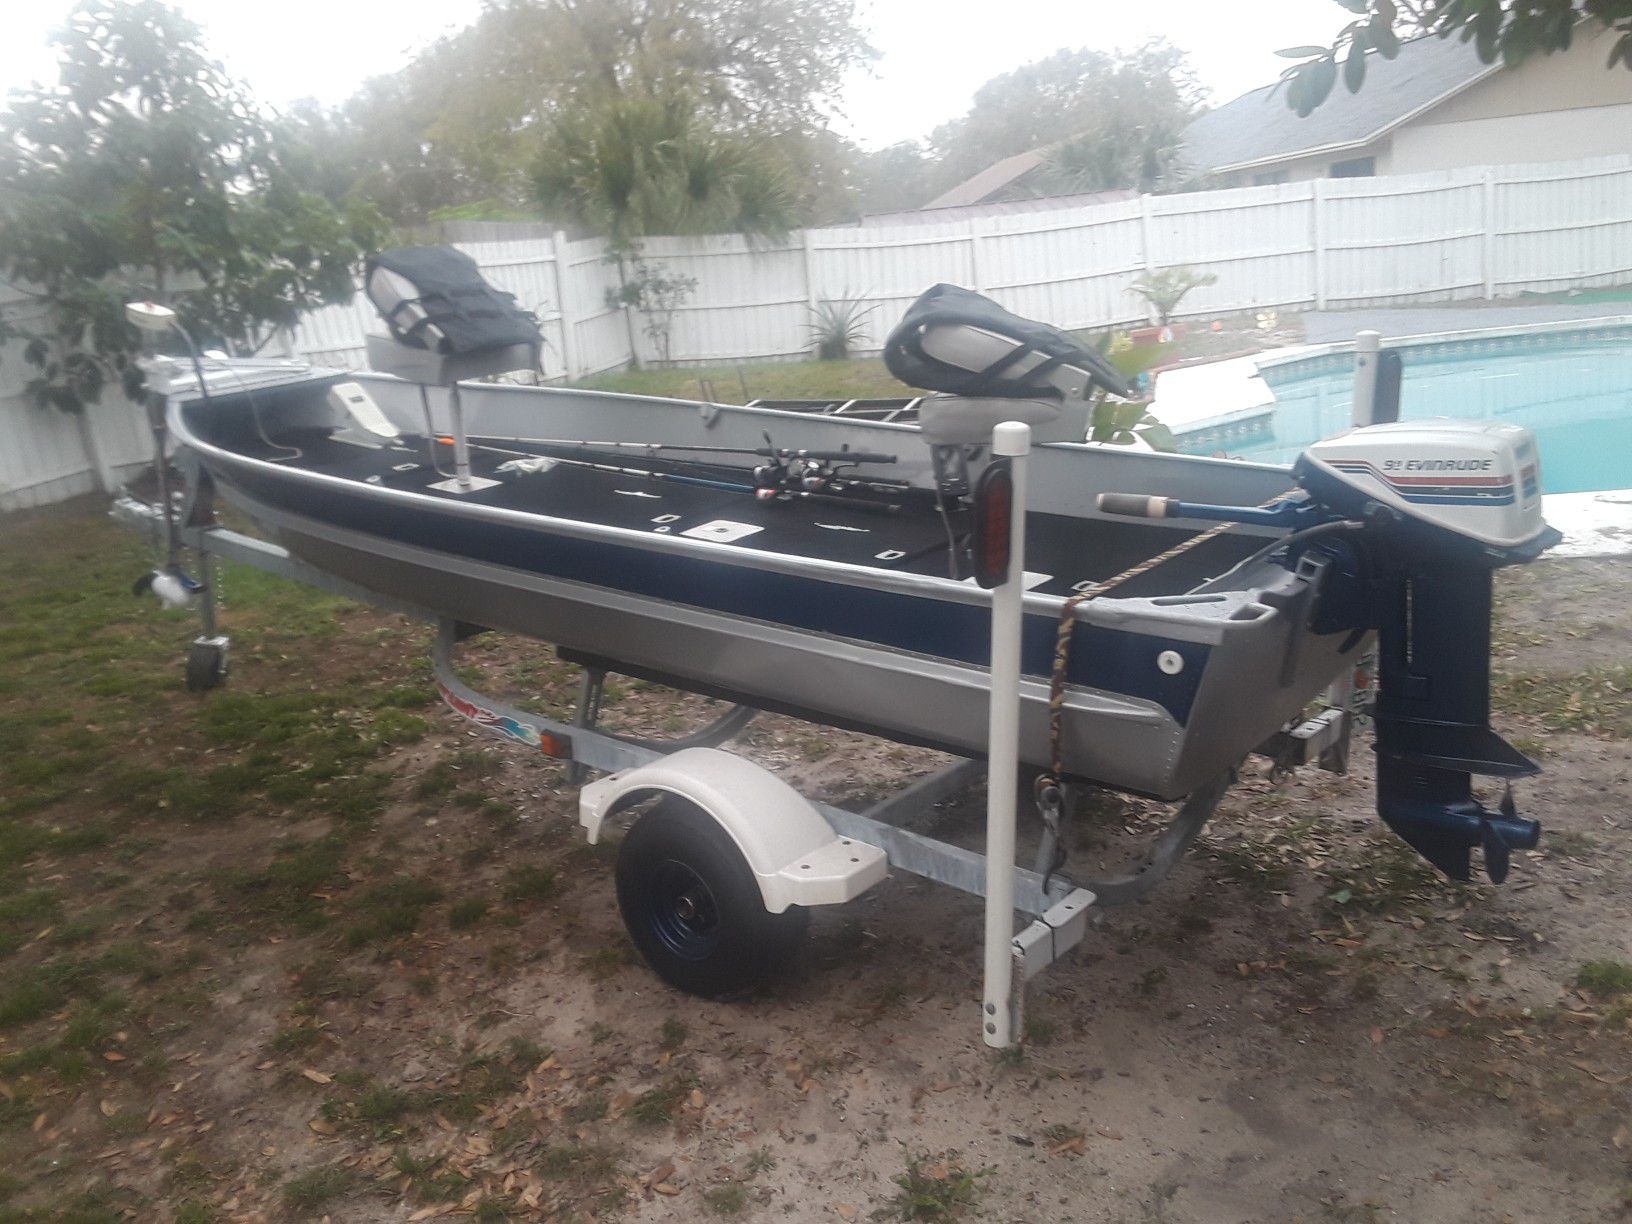 Aluminum boat 14 foot,new desk, great condition,clean title